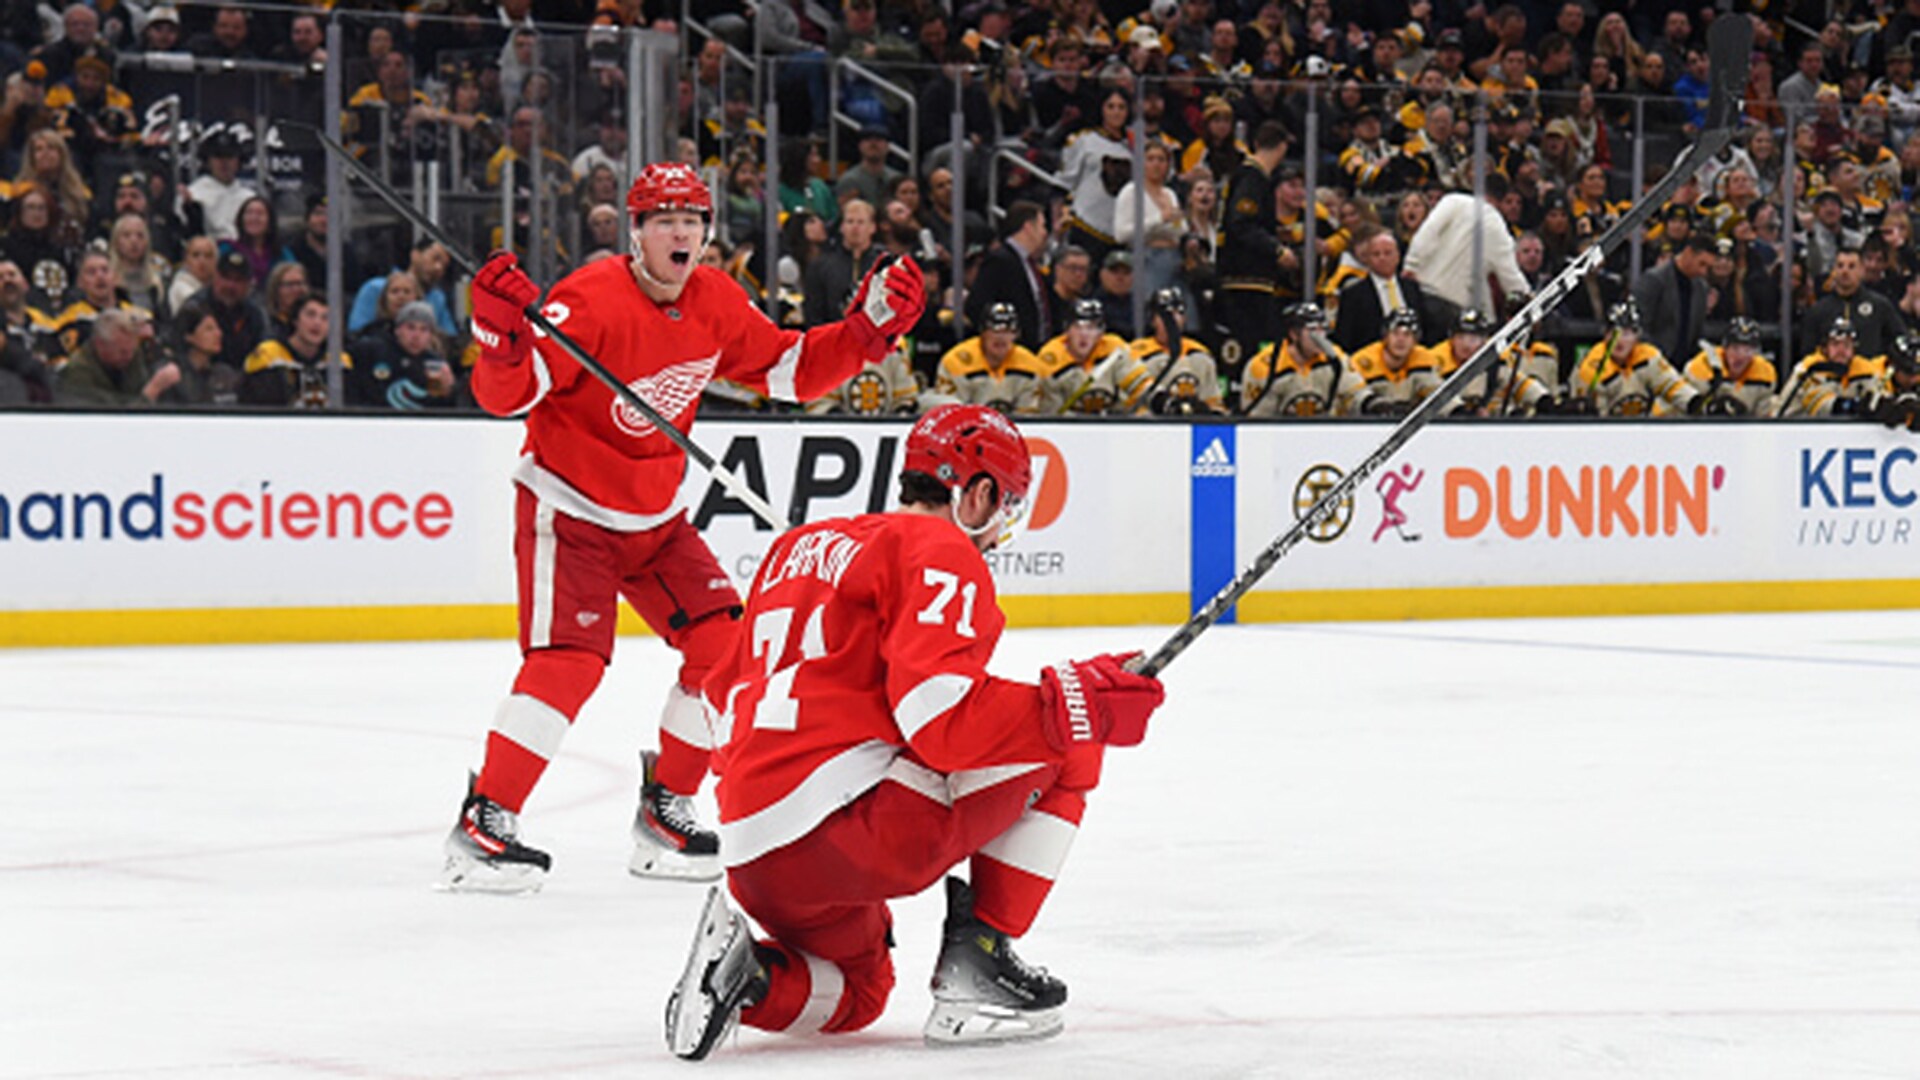 Red Wings F David Perron suspended 6 games for cross-checking, National